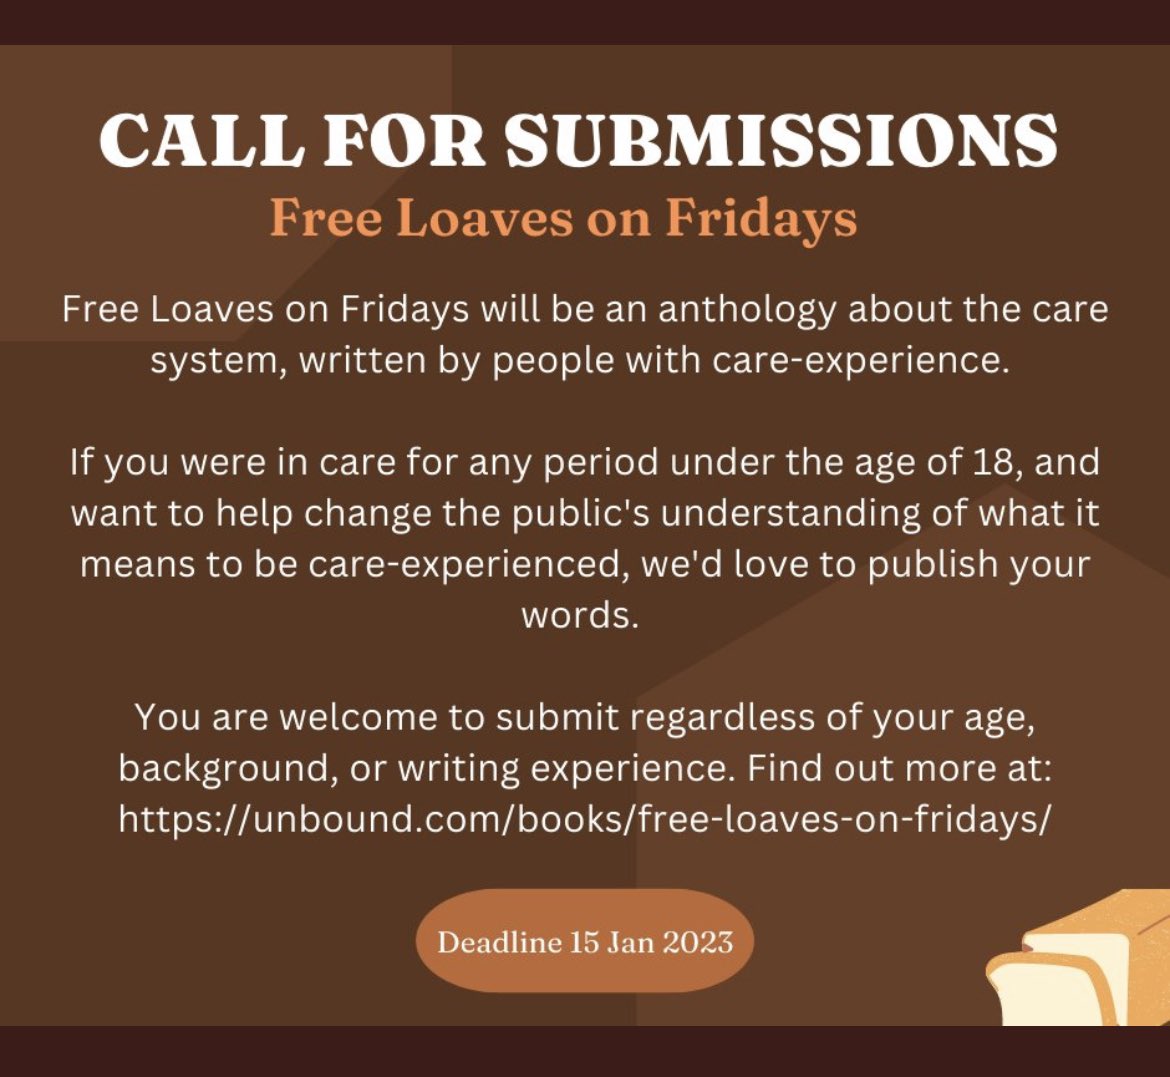 📣 Calling care-experienced writers of all ages. #FreeLoavesonFridays is open for submissions! Your words are welcome here - no former writing experience is necessary, and no one will be turned away. Find out how to apply/FAQs in the link below. Deadline 15th Jan ‘23 @unbounders